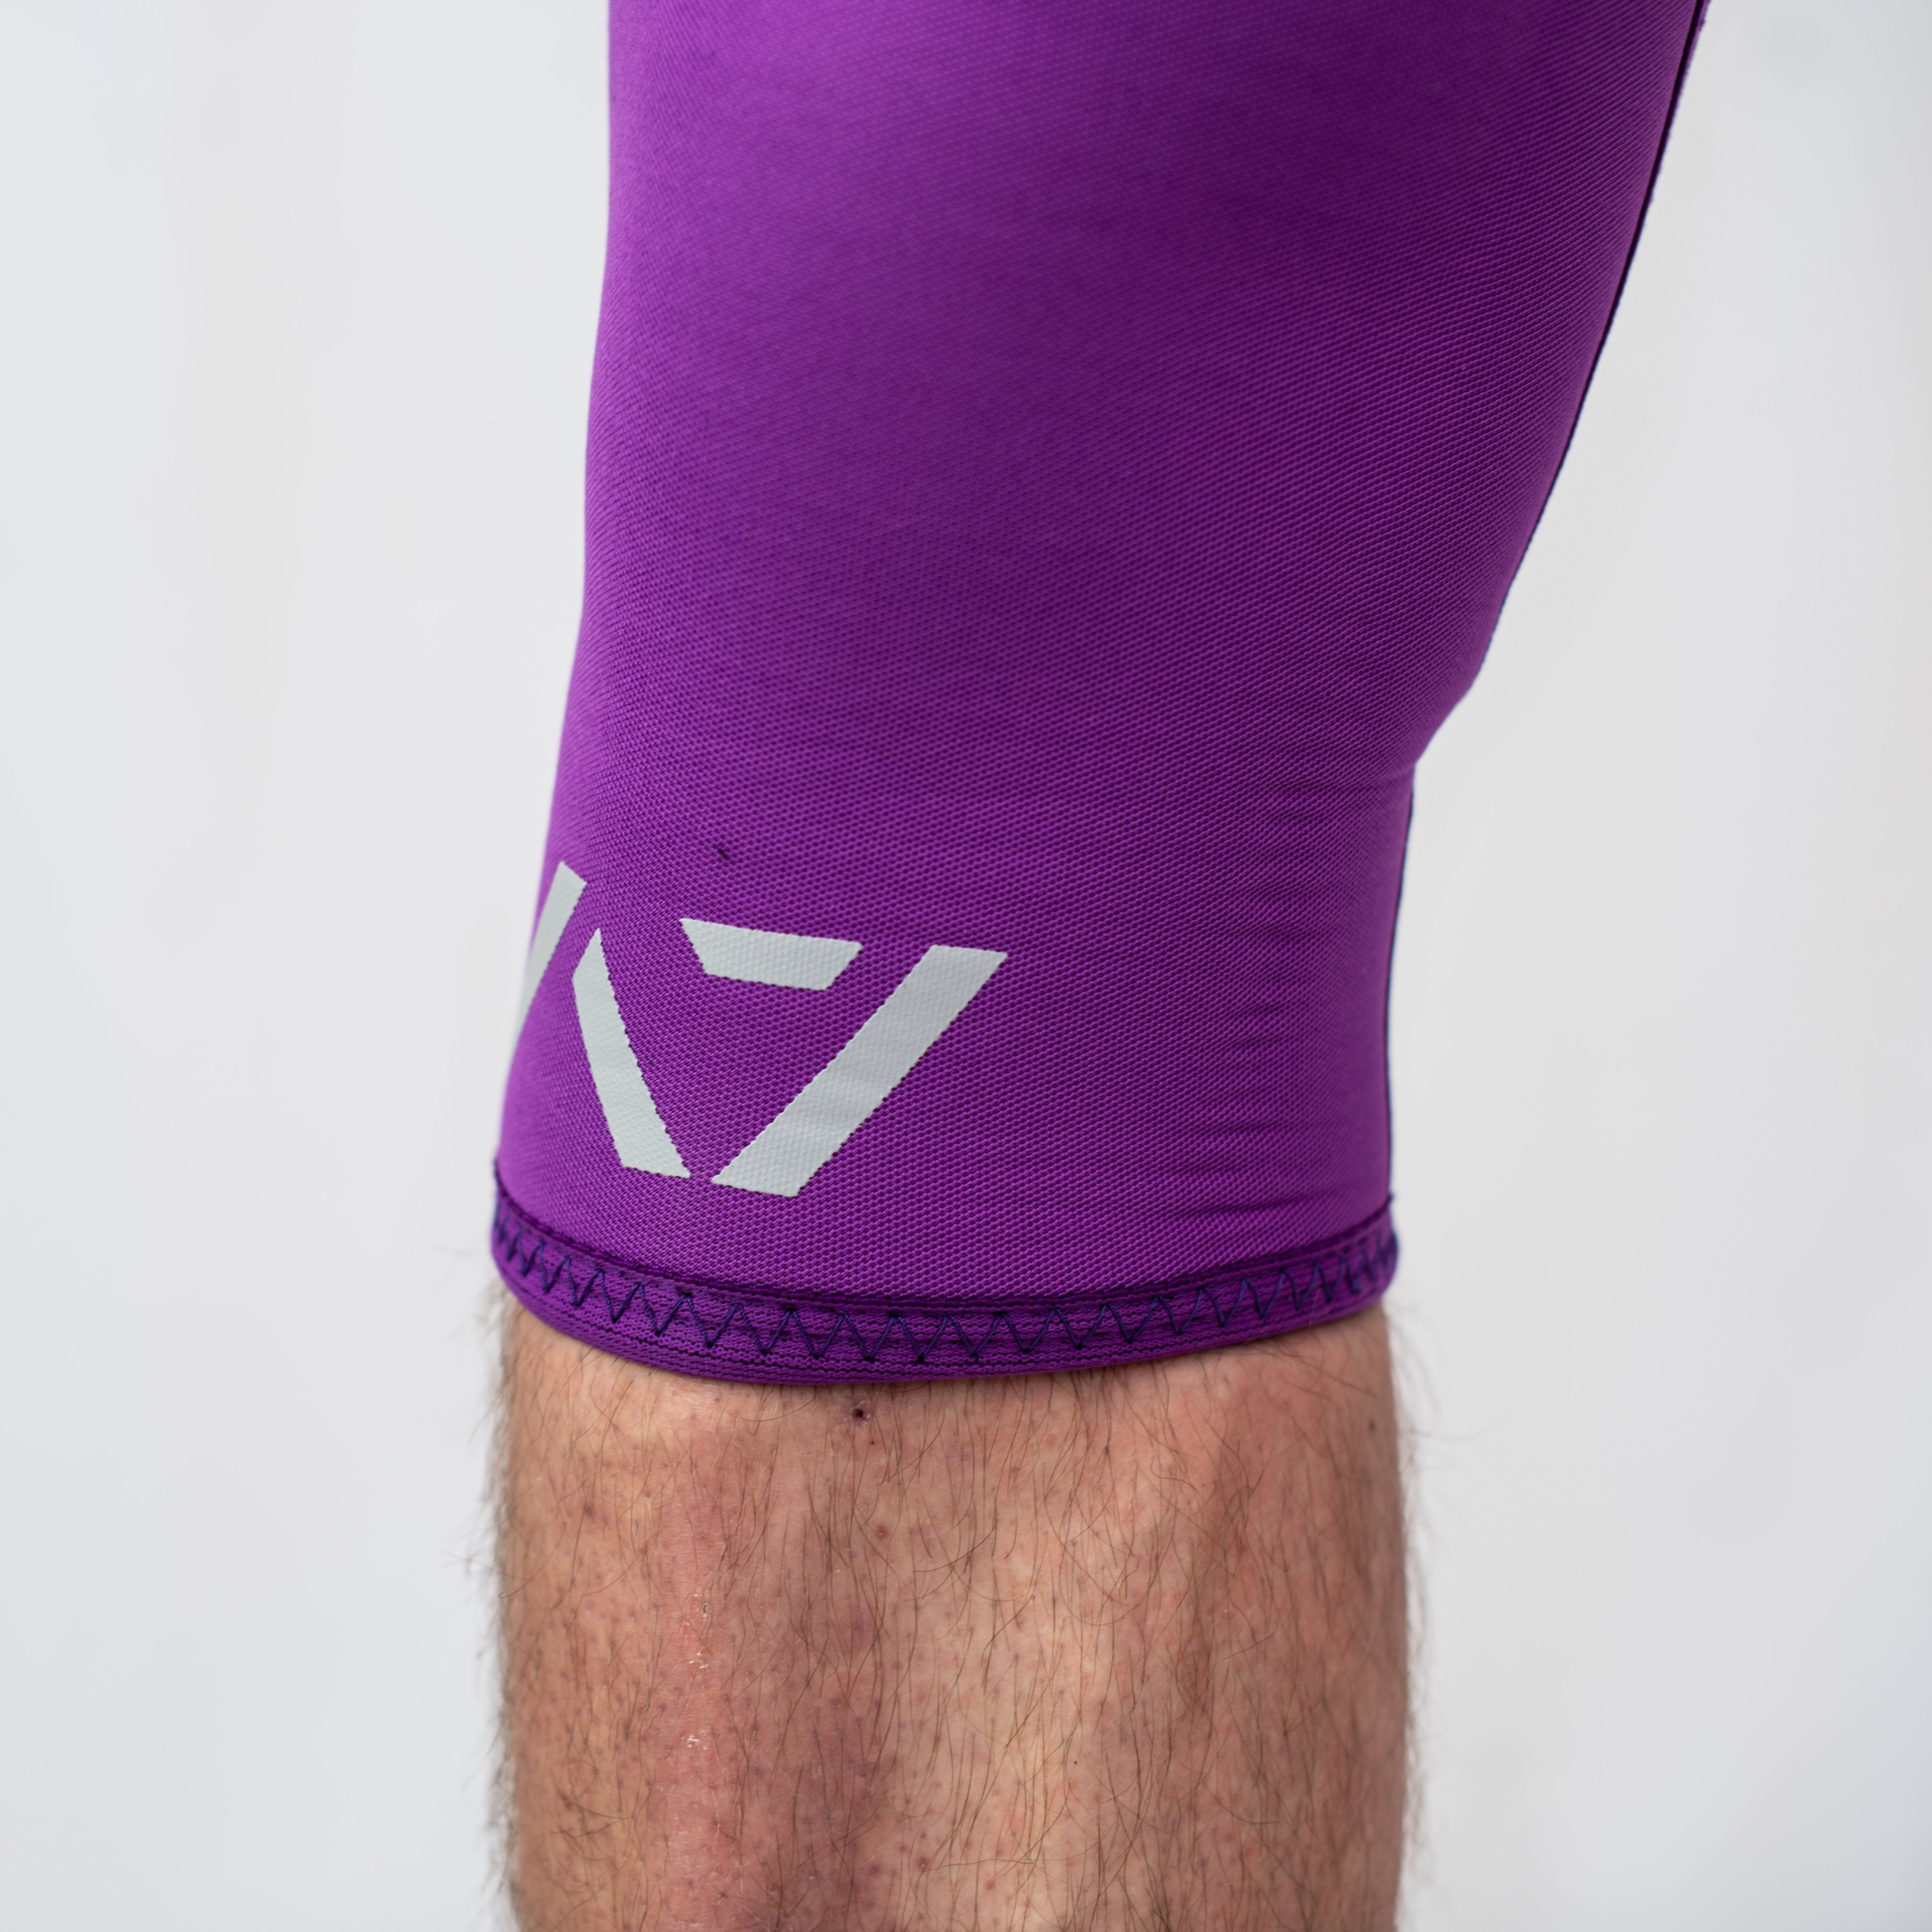 A7 IPF approved Purple CONE knee sleeves are structured with a downward cut panel on the back of the quad and calf to ensure ultimate compression at the knee joint. A7 CONE knee sleeves are IPF approved for use in all powerlifting competitions. A7 CONE Knee Sleeves are IPF Approved Kit. A7 cone knee sleeves are made with high quality neoprene and the knee sleeves are sold as a pair. The double seam on the knee sleeves create a greater tension on the knee joint. A7 UK shipping to UK and Europe. 